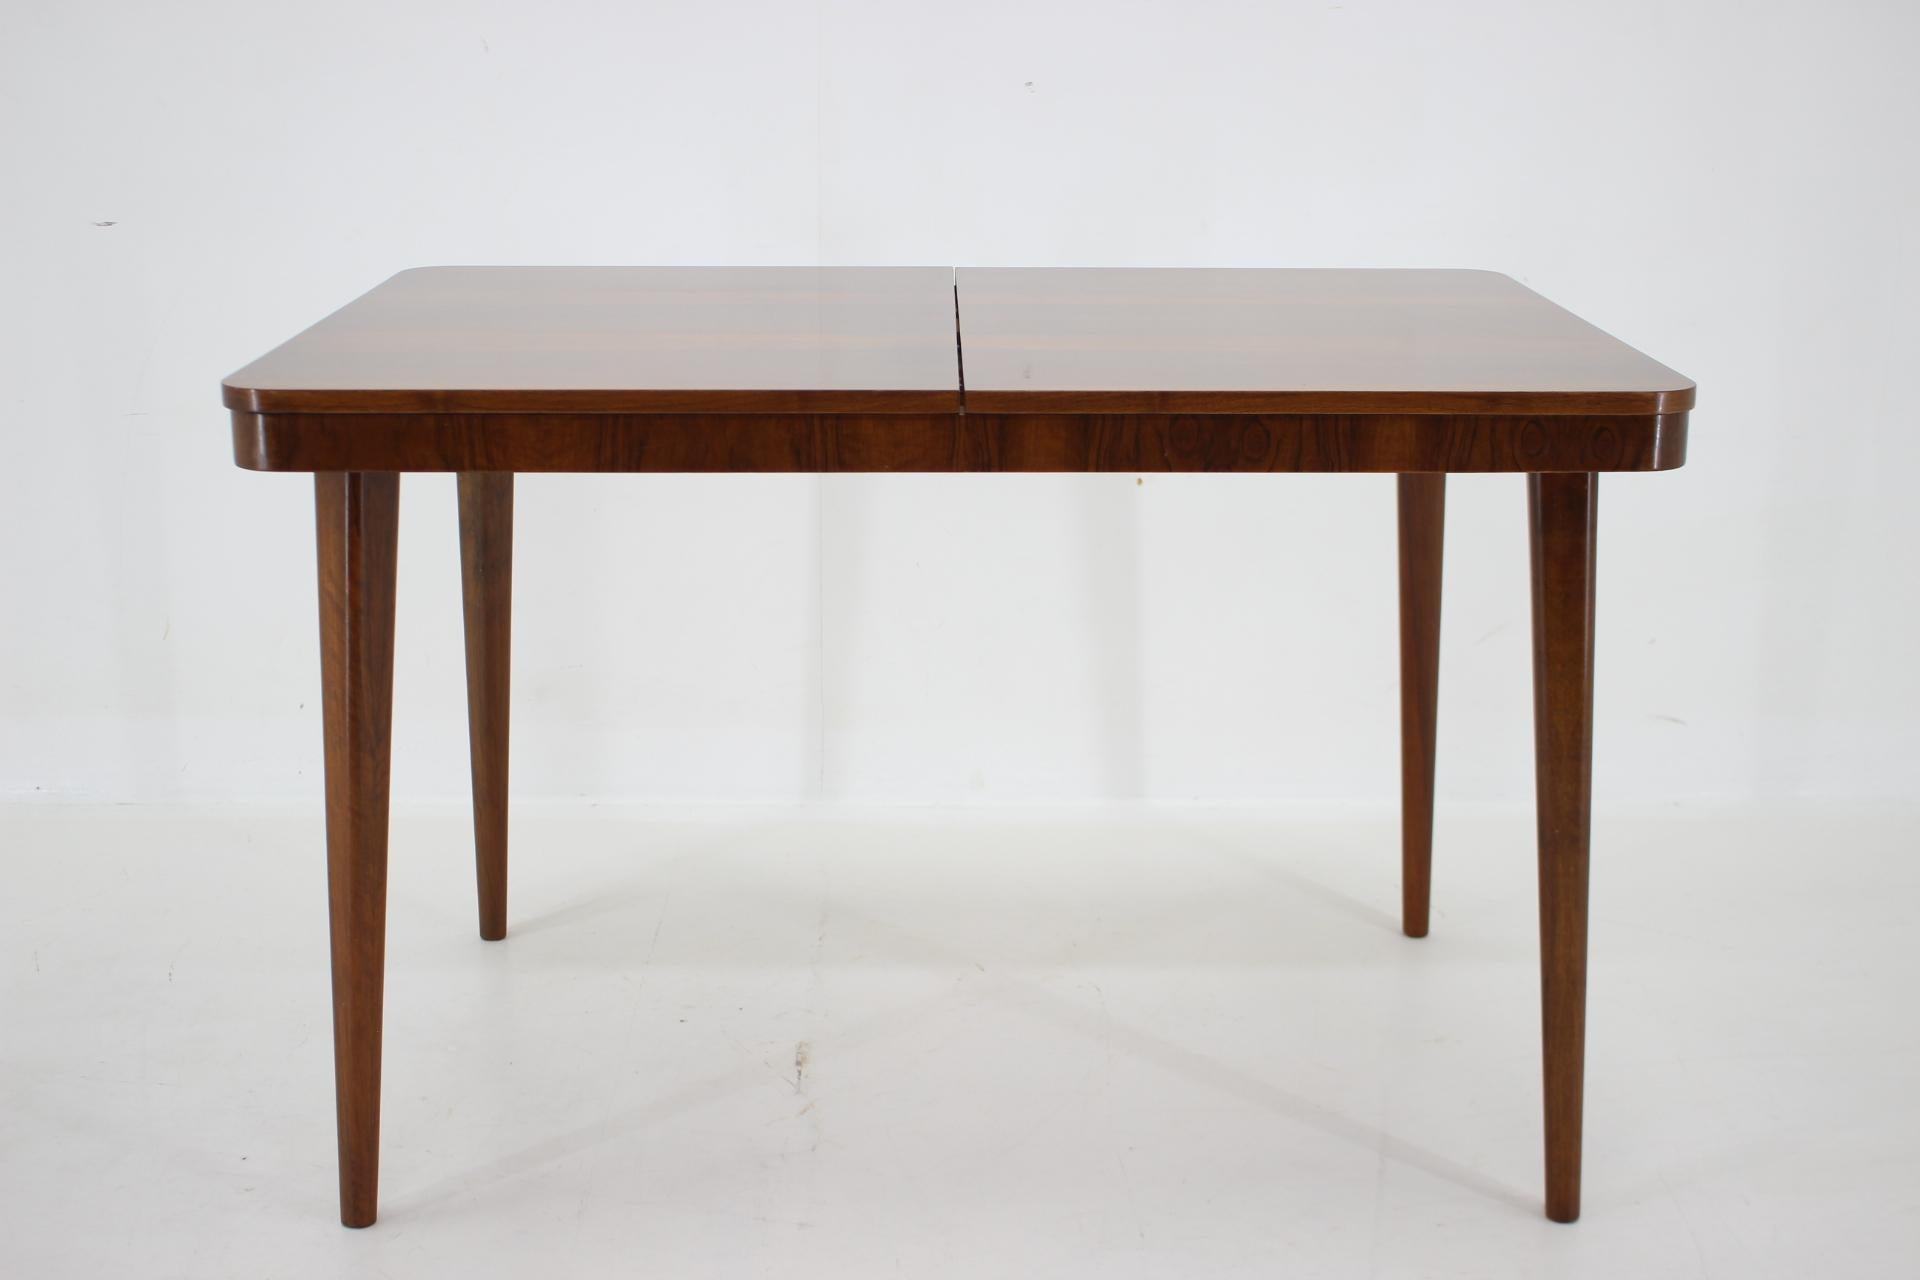 - Good original condition with minor signs of use
- Extended Table Dimensions: 170cm